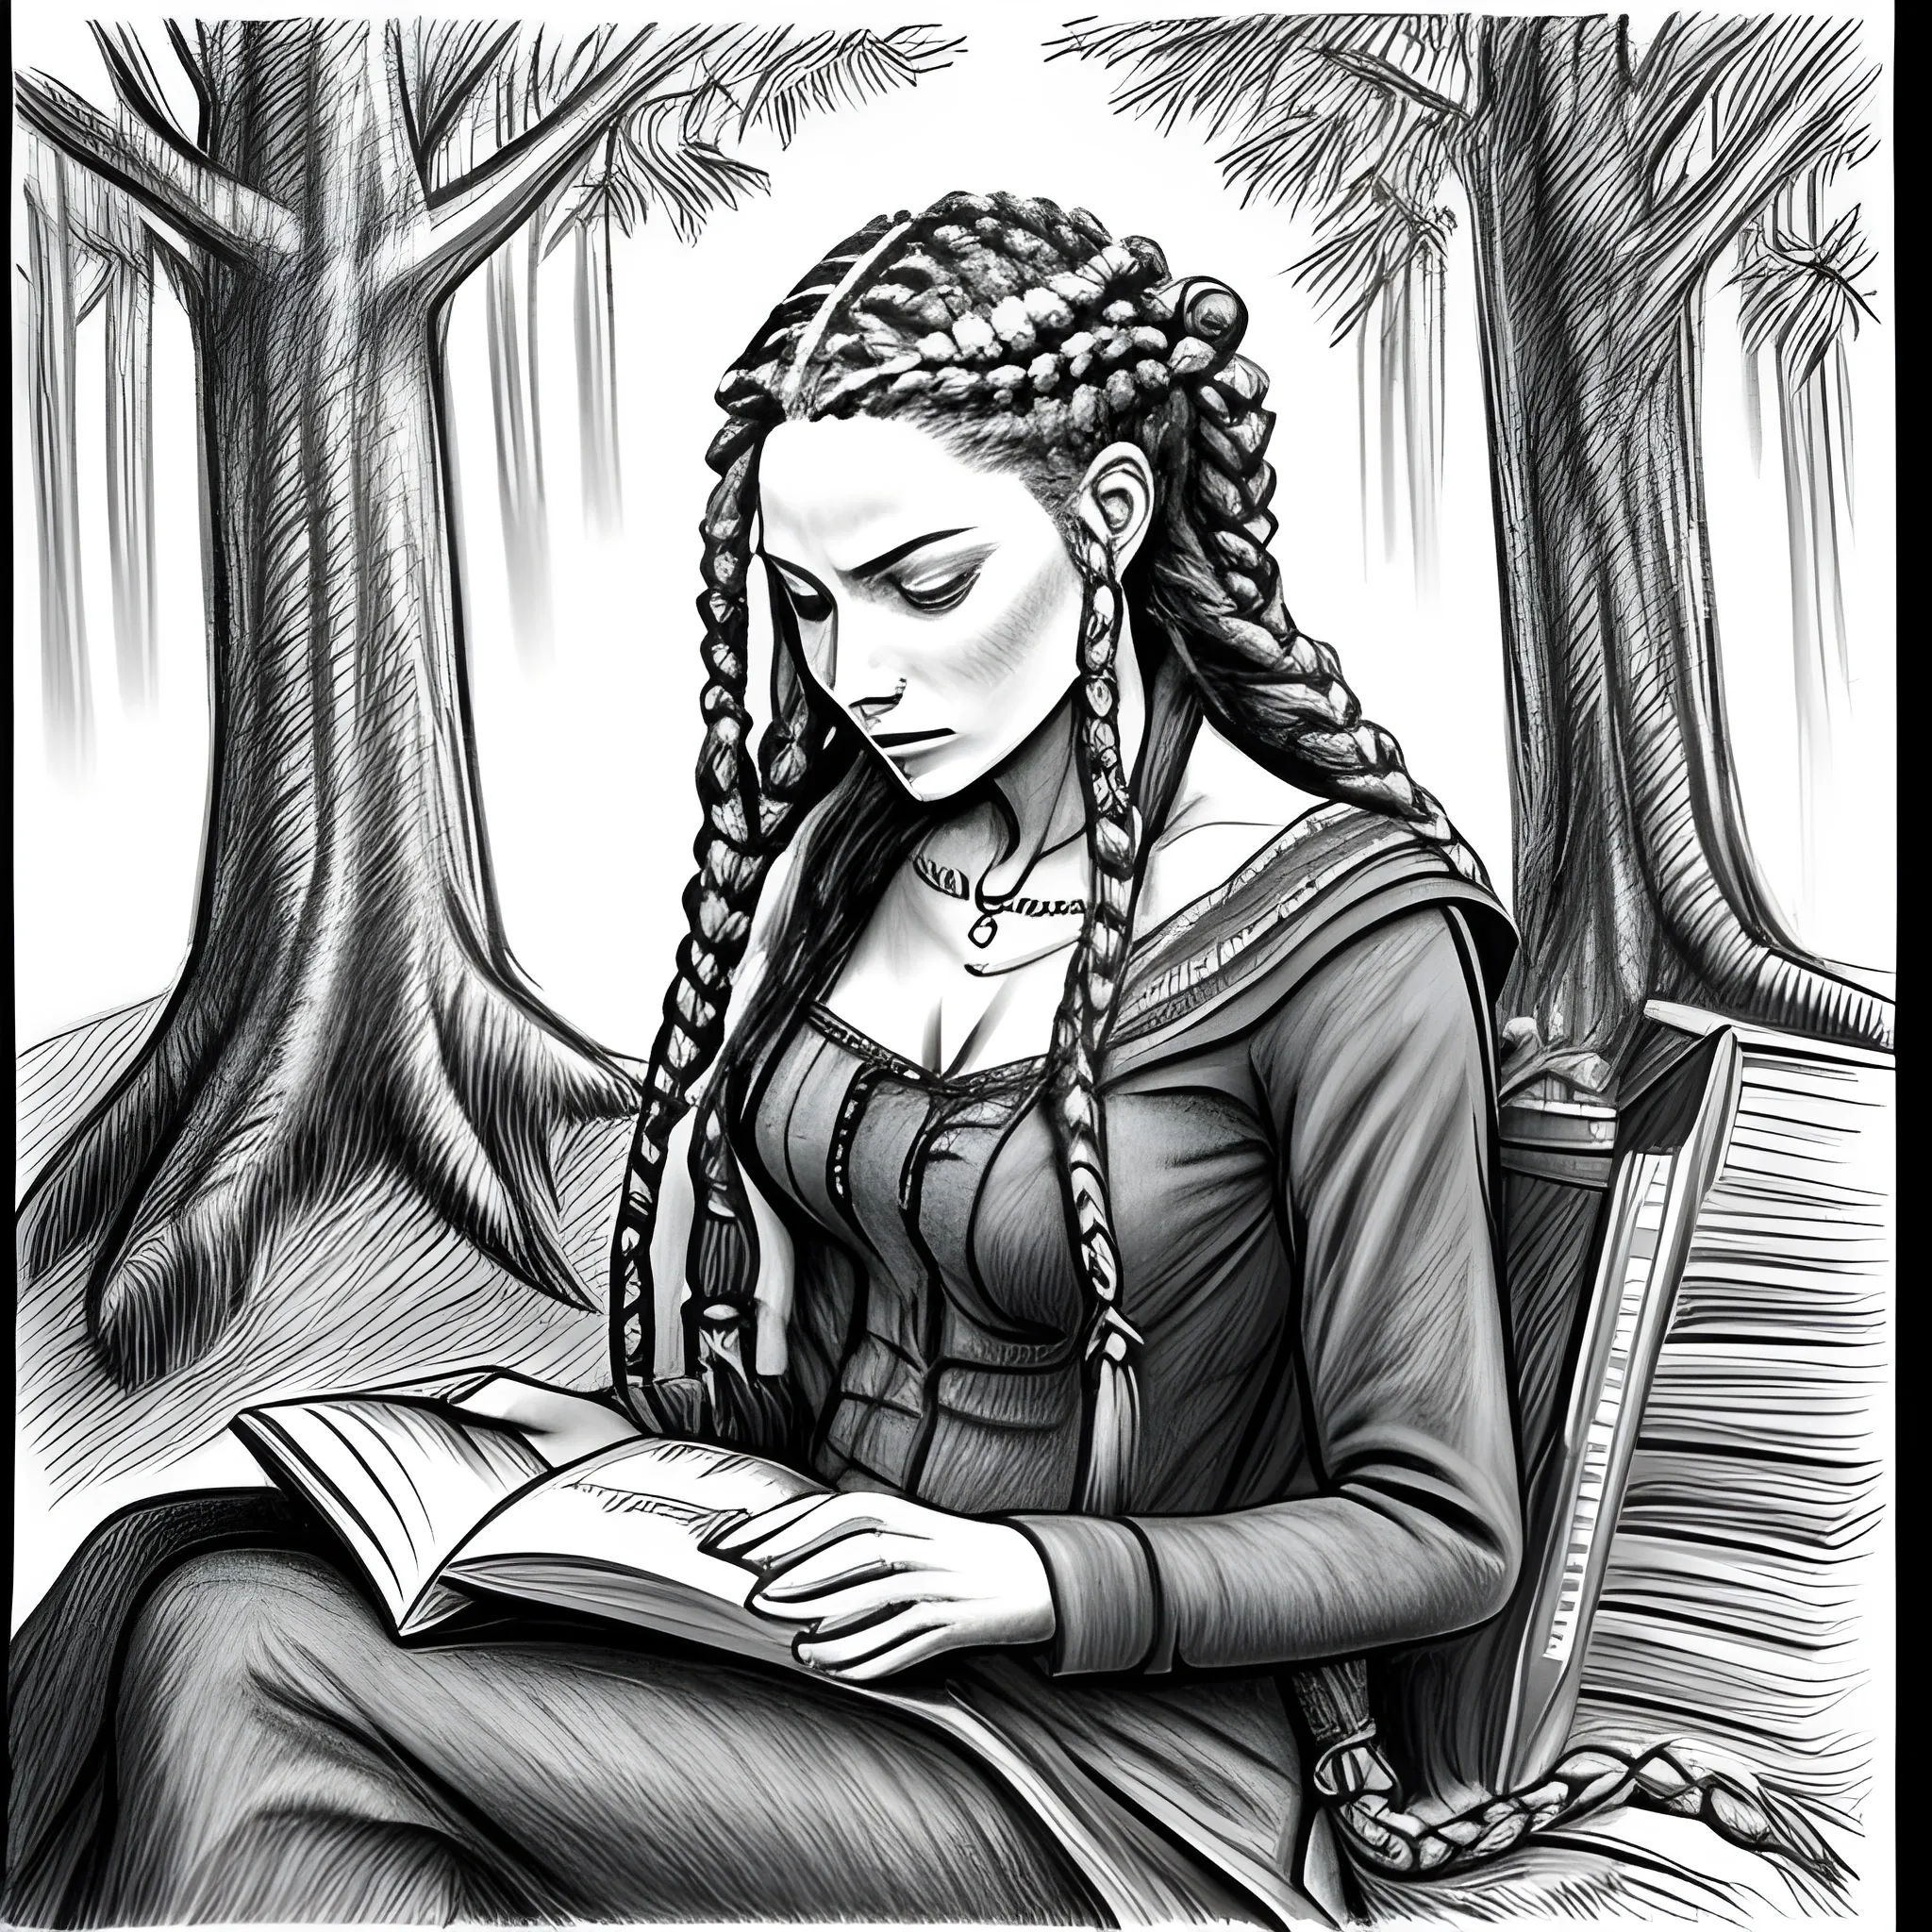 pencil sketch of a witchy woman with hair in braids reading a book in a forest